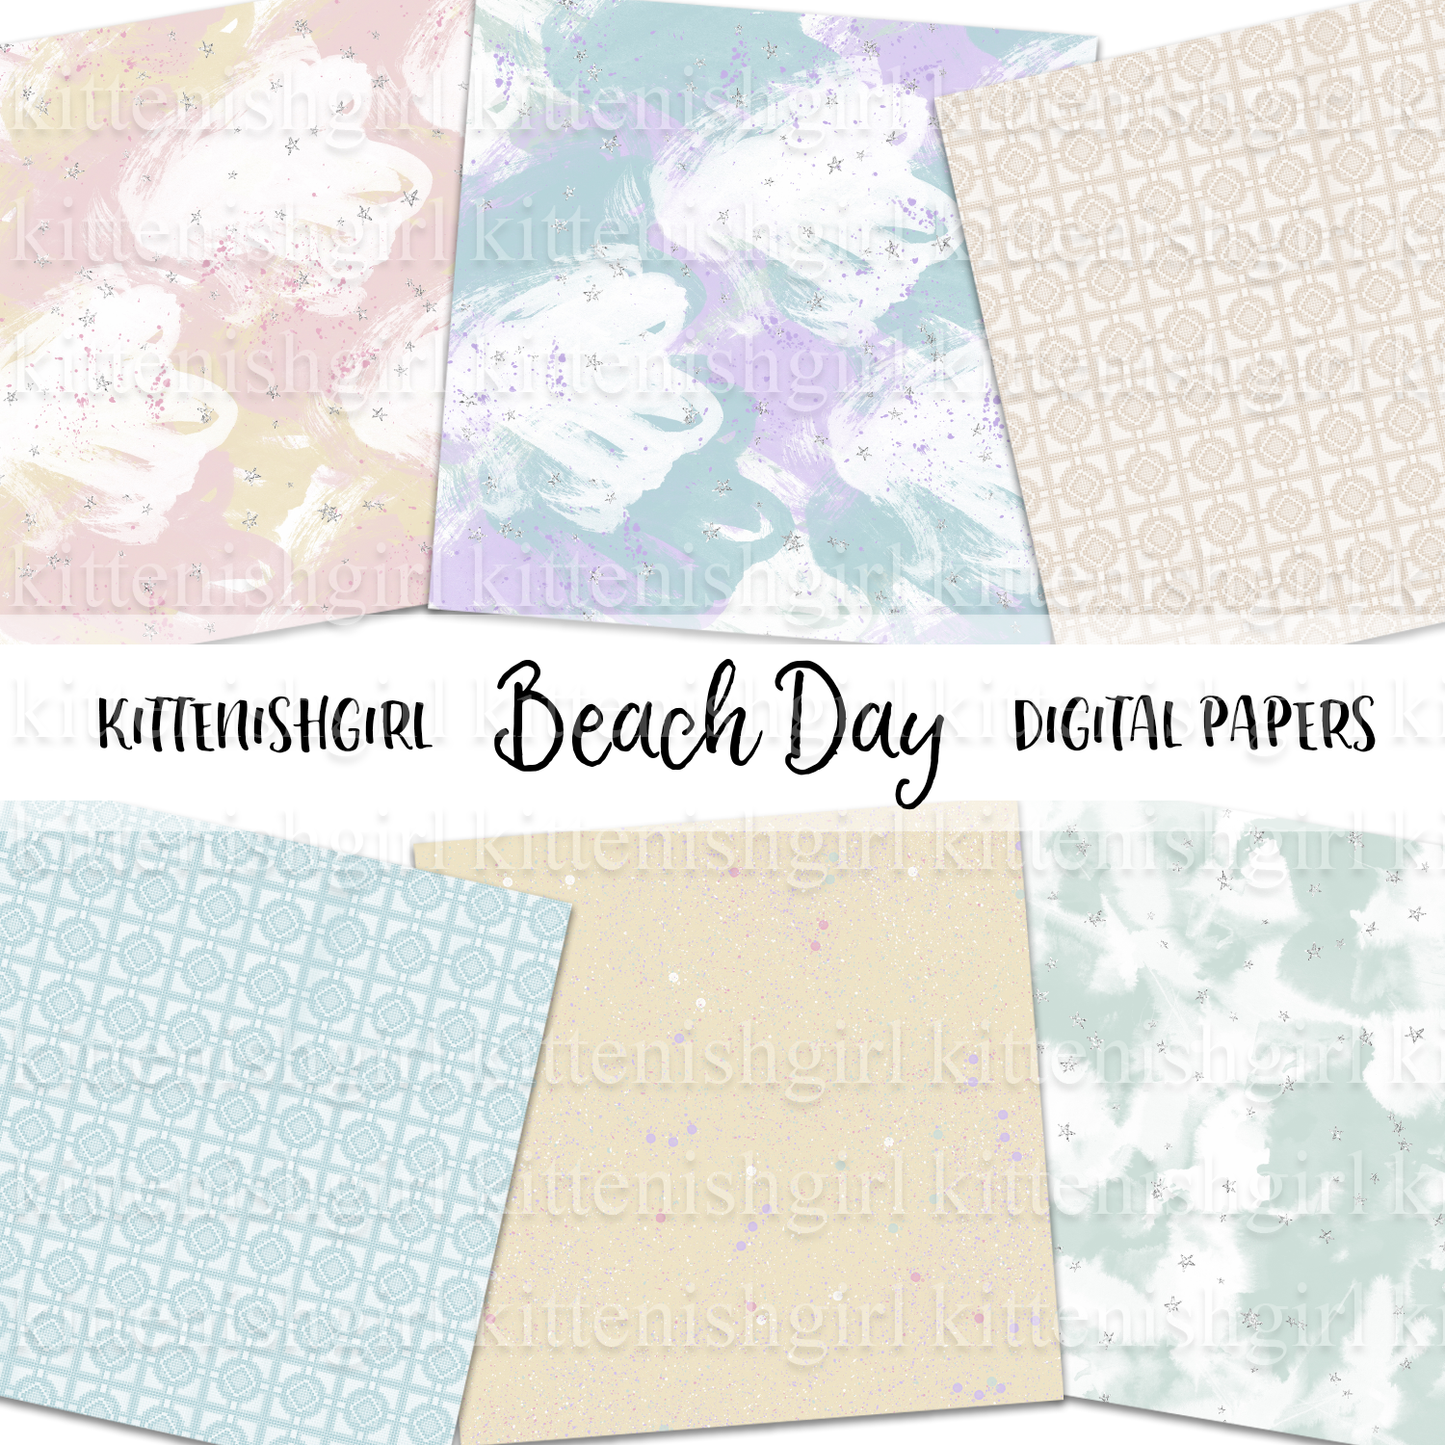 Beach Day // Digital Papers